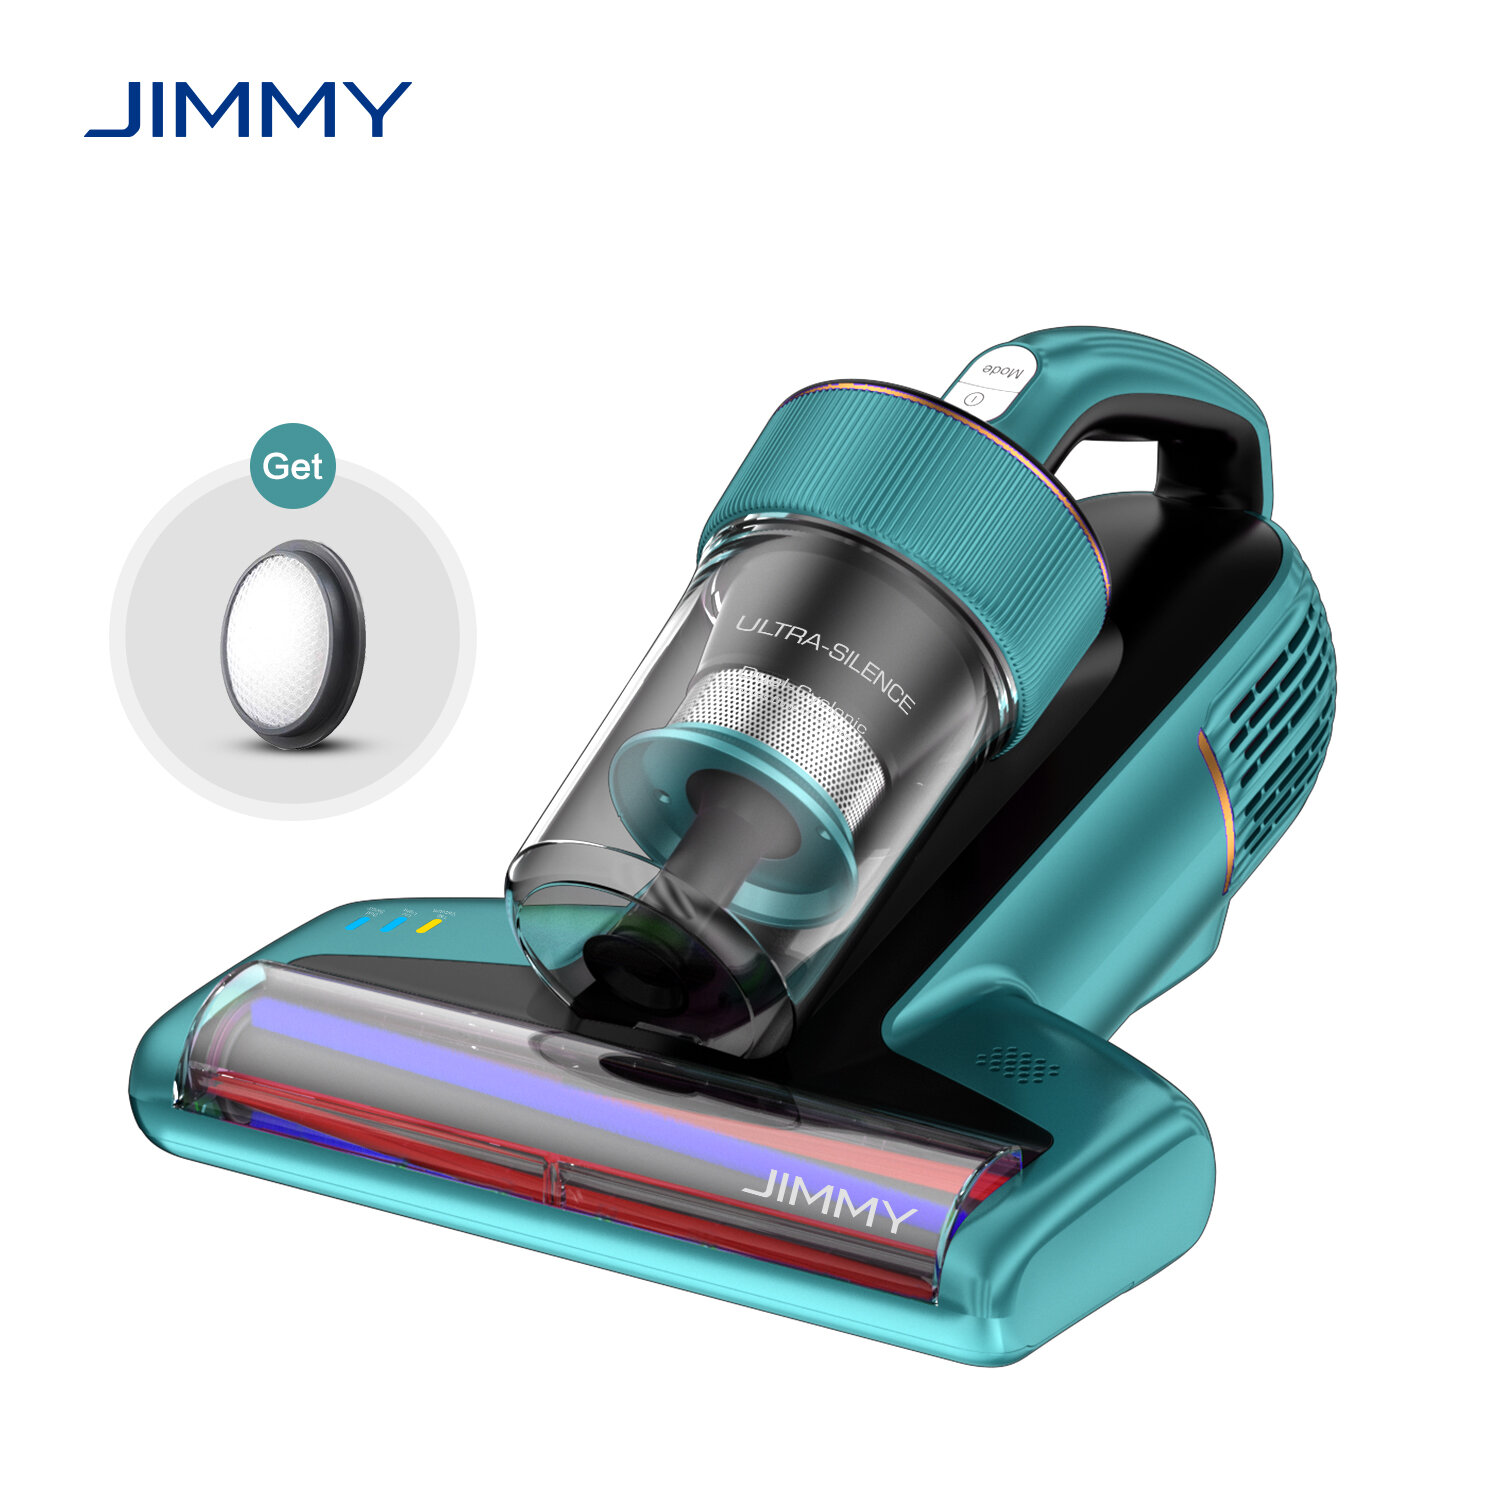 

JIMMY BX6 Handheld Anti-Mite Vacuum Cleaner 600W Suction Strong Tapping Ultrasonic & UV Sterilization Intelligent Dust R